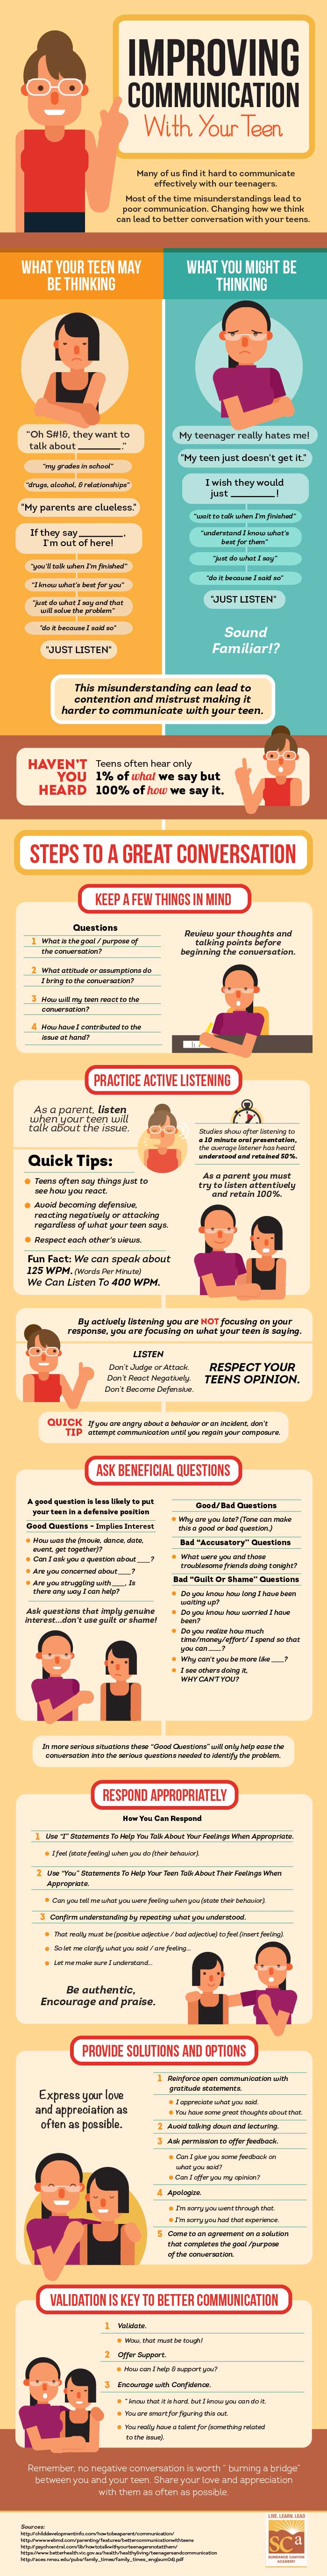 Improving Communication With Your Teen